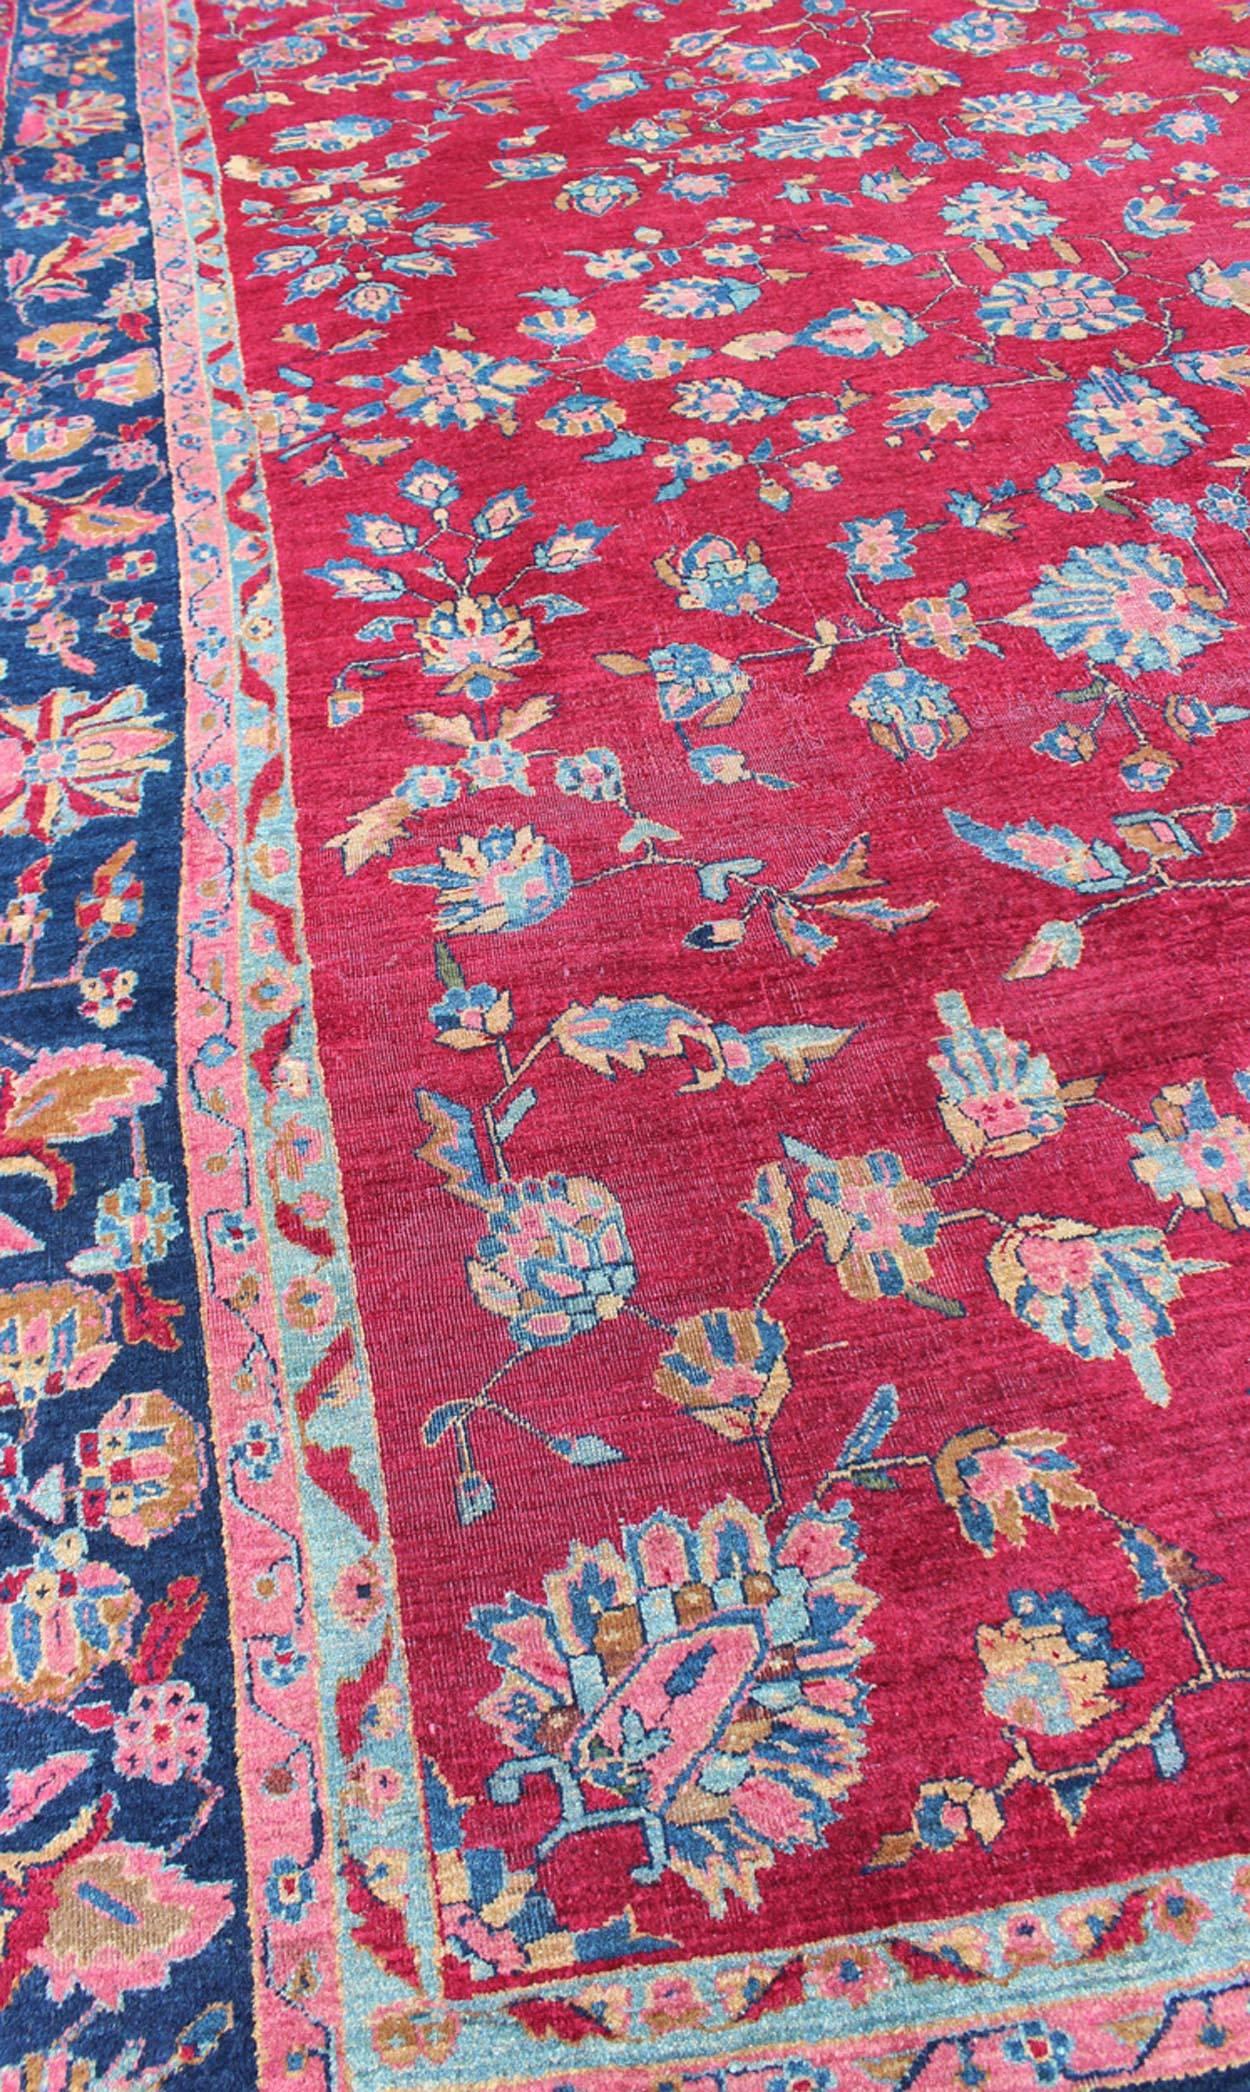 Wool All-Over Floral Design Antique Indian Amritsar Rug in Red and Blue Tones For Sale